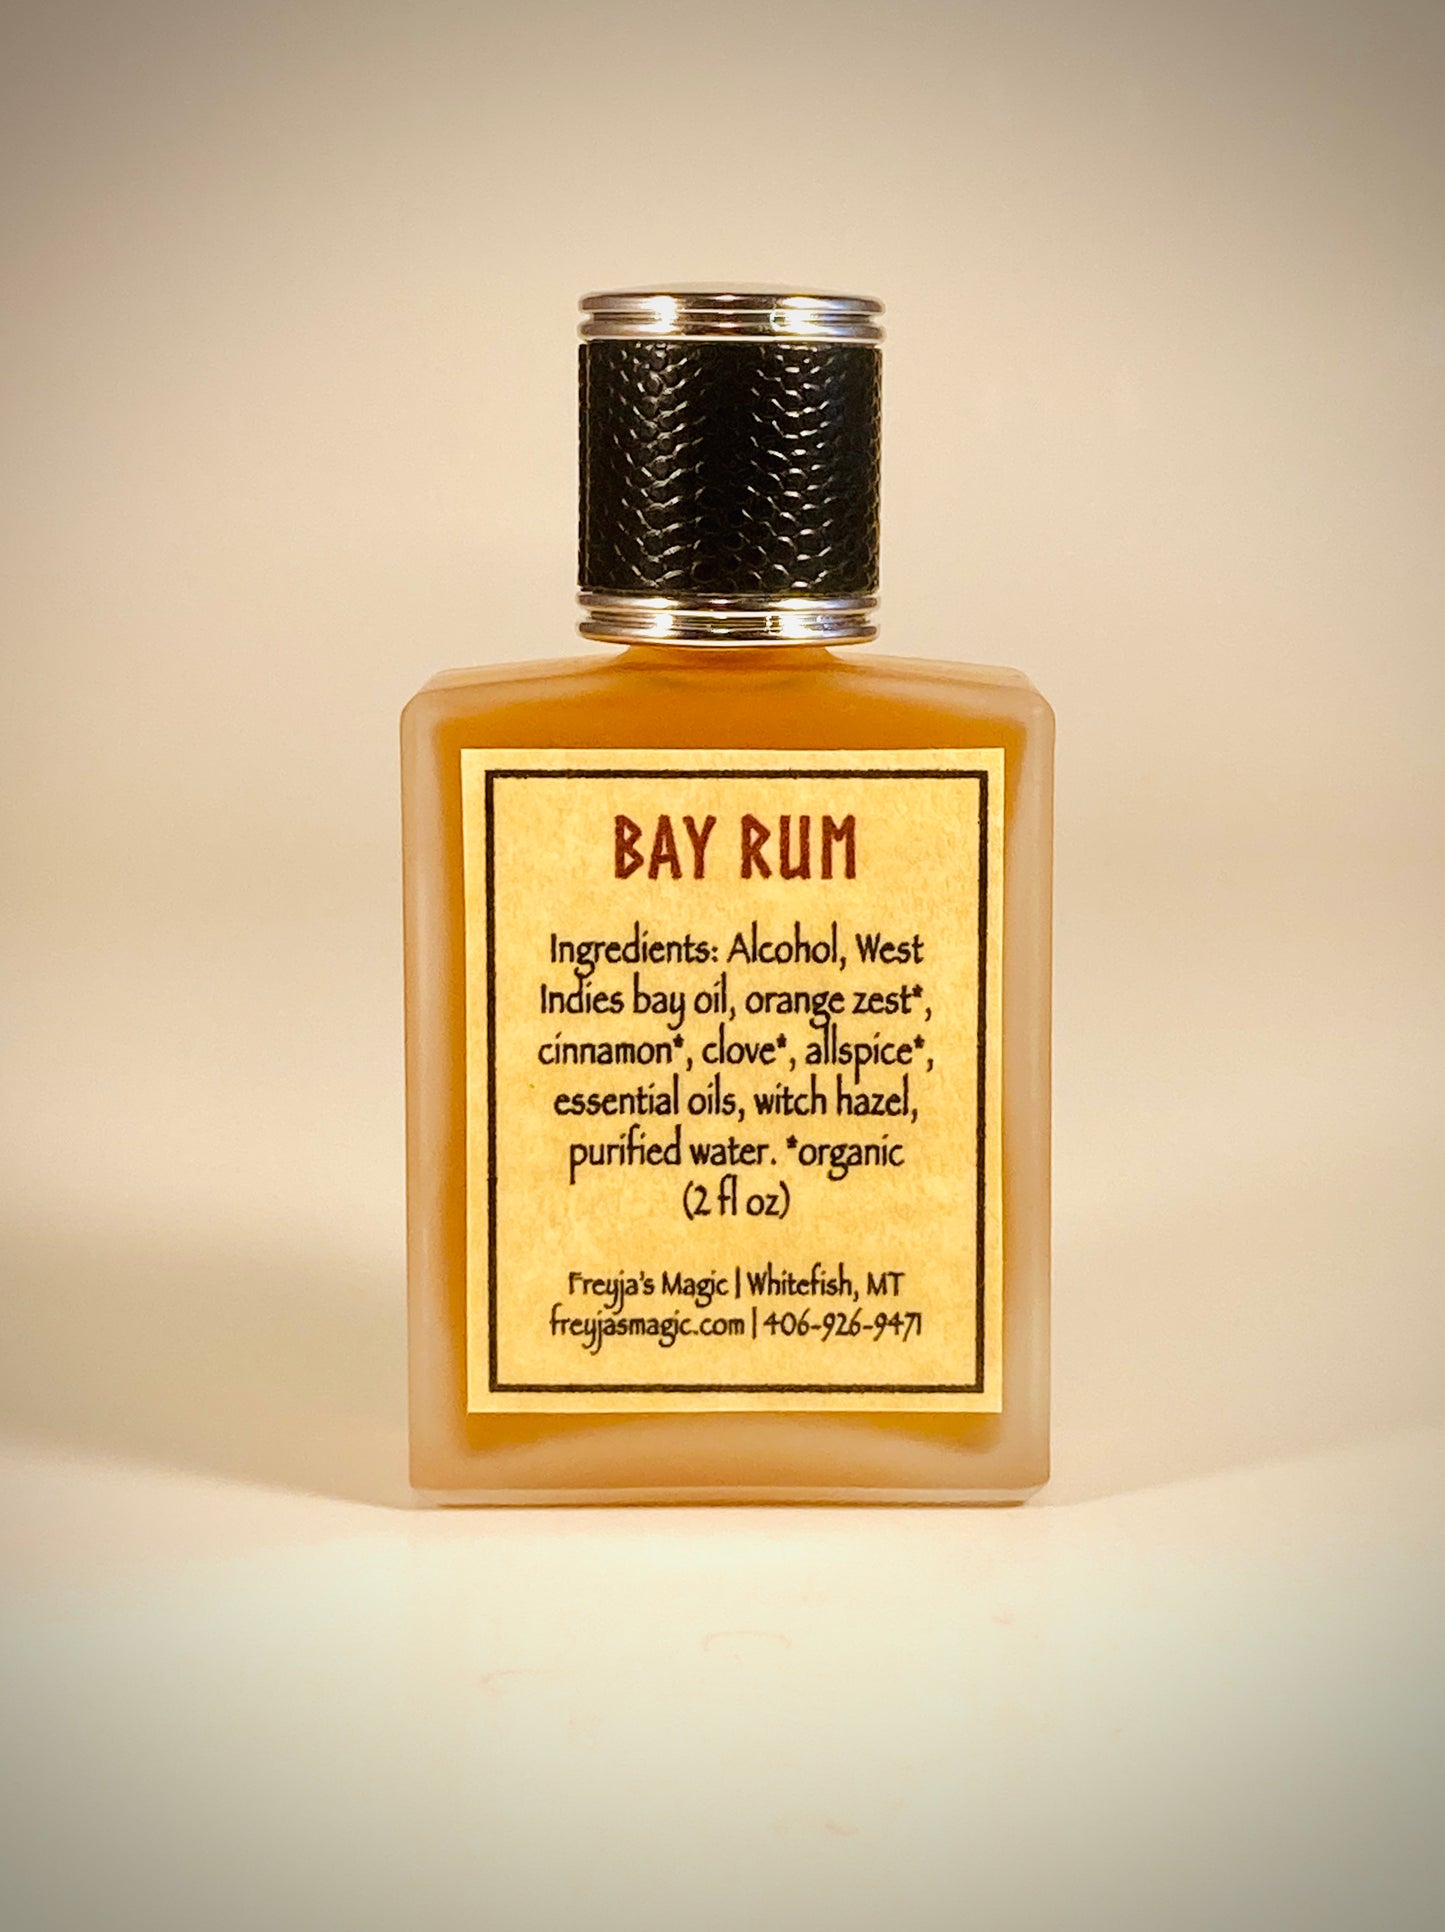 Bay Rum Aftershave Special Edition | Thor's Hammer Classic Bay Rum with Frosted Glass Bottle + Gift Bag | Top Shelf Viking Bay Rum | 2 oz